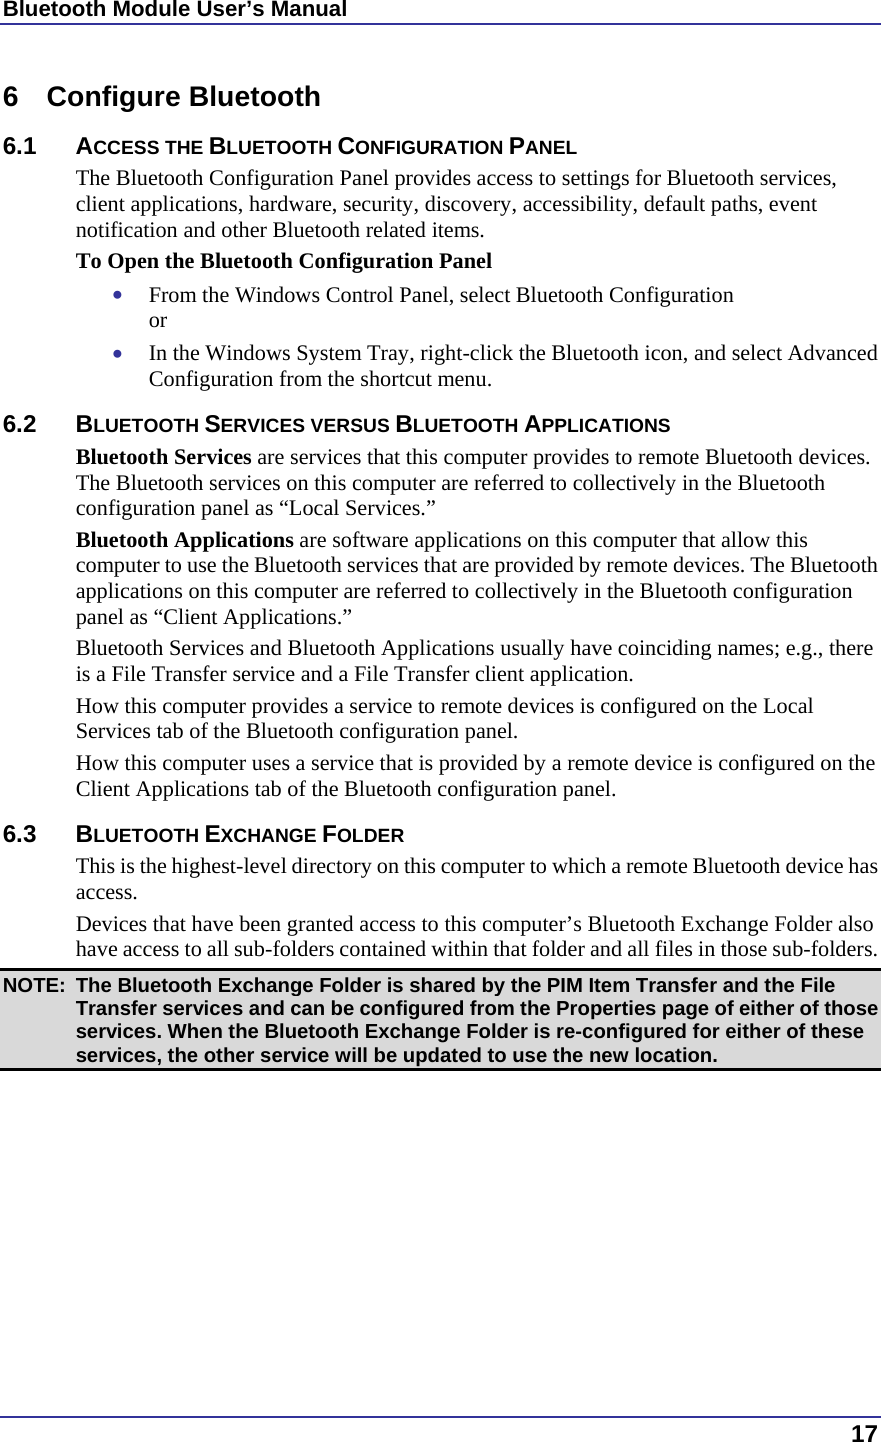 Bluetooth Module User’s Manual  17 6 Configure Bluetooth 6.1 ACCESS THE BLUETOOTH CONFIGURATION PANEL The Bluetooth Configuration Panel provides access to settings for Bluetooth services, client applications, hardware, security, discovery, accessibility, default paths, event notification and other Bluetooth related items. To Open the Bluetooth Configuration Panel •  From the Windows Control Panel, select Bluetooth Configuration or •  In the Windows System Tray, right-click the Bluetooth icon, and select Advanced Configuration from the shortcut menu. 6.2 BLUETOOTH SERVICES VERSUS BLUETOOTH APPLICATIONS Bluetooth Services are services that this computer provides to remote Bluetooth devices. The Bluetooth services on this computer are referred to collectively in the Bluetooth configuration panel as “Local Services.” Bluetooth Applications are software applications on this computer that allow this computer to use the Bluetooth services that are provided by remote devices. The Bluetooth applications on this computer are referred to collectively in the Bluetooth configuration panel as “Client Applications.” Bluetooth Services and Bluetooth Applications usually have coinciding names; e.g., there is a File Transfer service and a File Transfer client application. How this computer provides a service to remote devices is configured on the Local Services tab of the Bluetooth configuration panel. How this computer uses a service that is provided by a remote device is configured on the Client Applications tab of the Bluetooth configuration panel. 6.3 BLUETOOTH EXCHANGE FOLDER This is the highest-level directory on this computer to which a remote Bluetooth device has access. Devices that have been granted access to this computer’s Bluetooth Exchange Folder also have access to all sub-folders contained within that folder and all files in those sub-folders. NOTE:  The Bluetooth Exchange Folder is shared by the PIM Item Transfer and the File Transfer services and can be configured from the Properties page of either of those services. When the Bluetooth Exchange Folder is re-configured for either of these services, the other service will be updated to use the new location. 